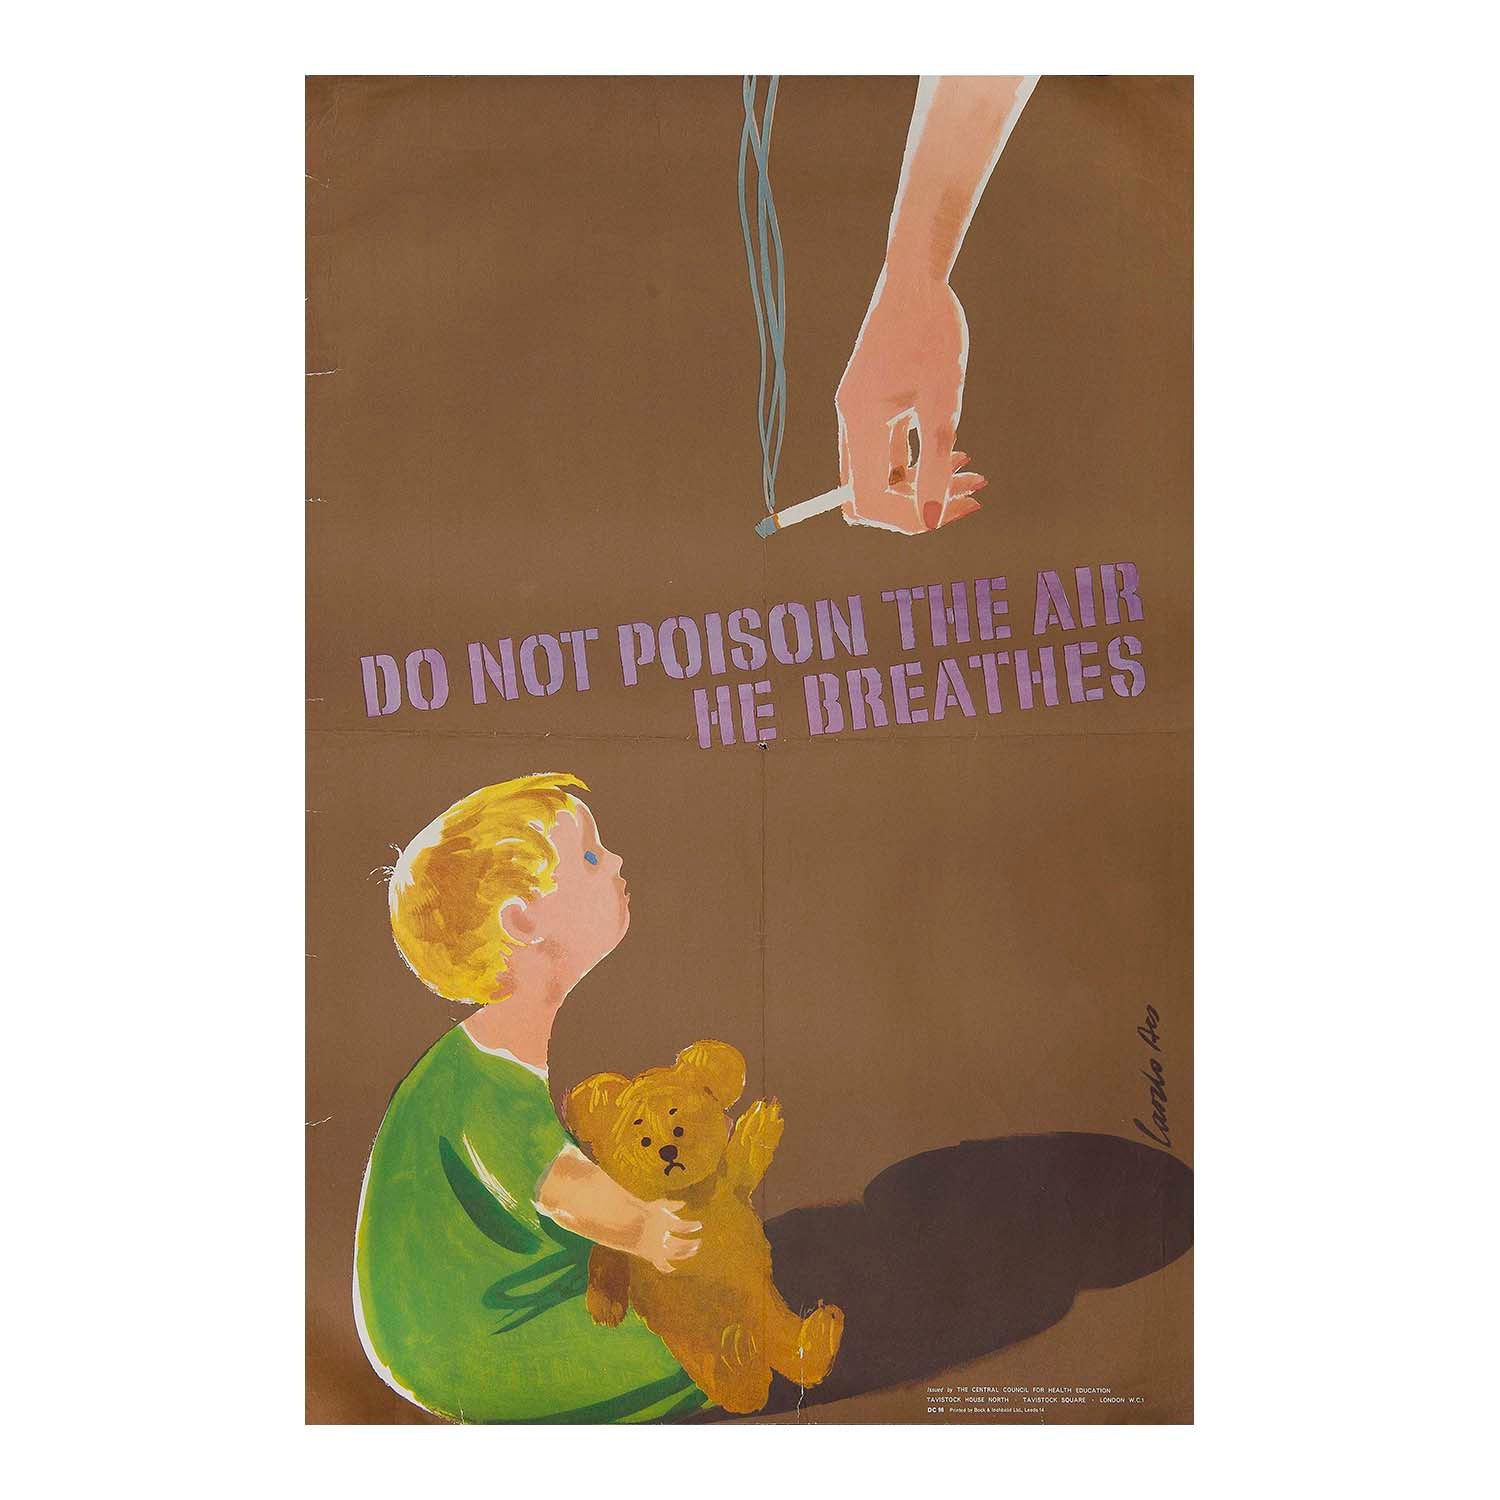 anti-smoking poster by the Hungarian designer Laszlo Bela Acs, c. 1965. Depicts a child holding a teddy bear looking up at a hand holding a cigarette with the message Do Not Poison The Air He Breathes